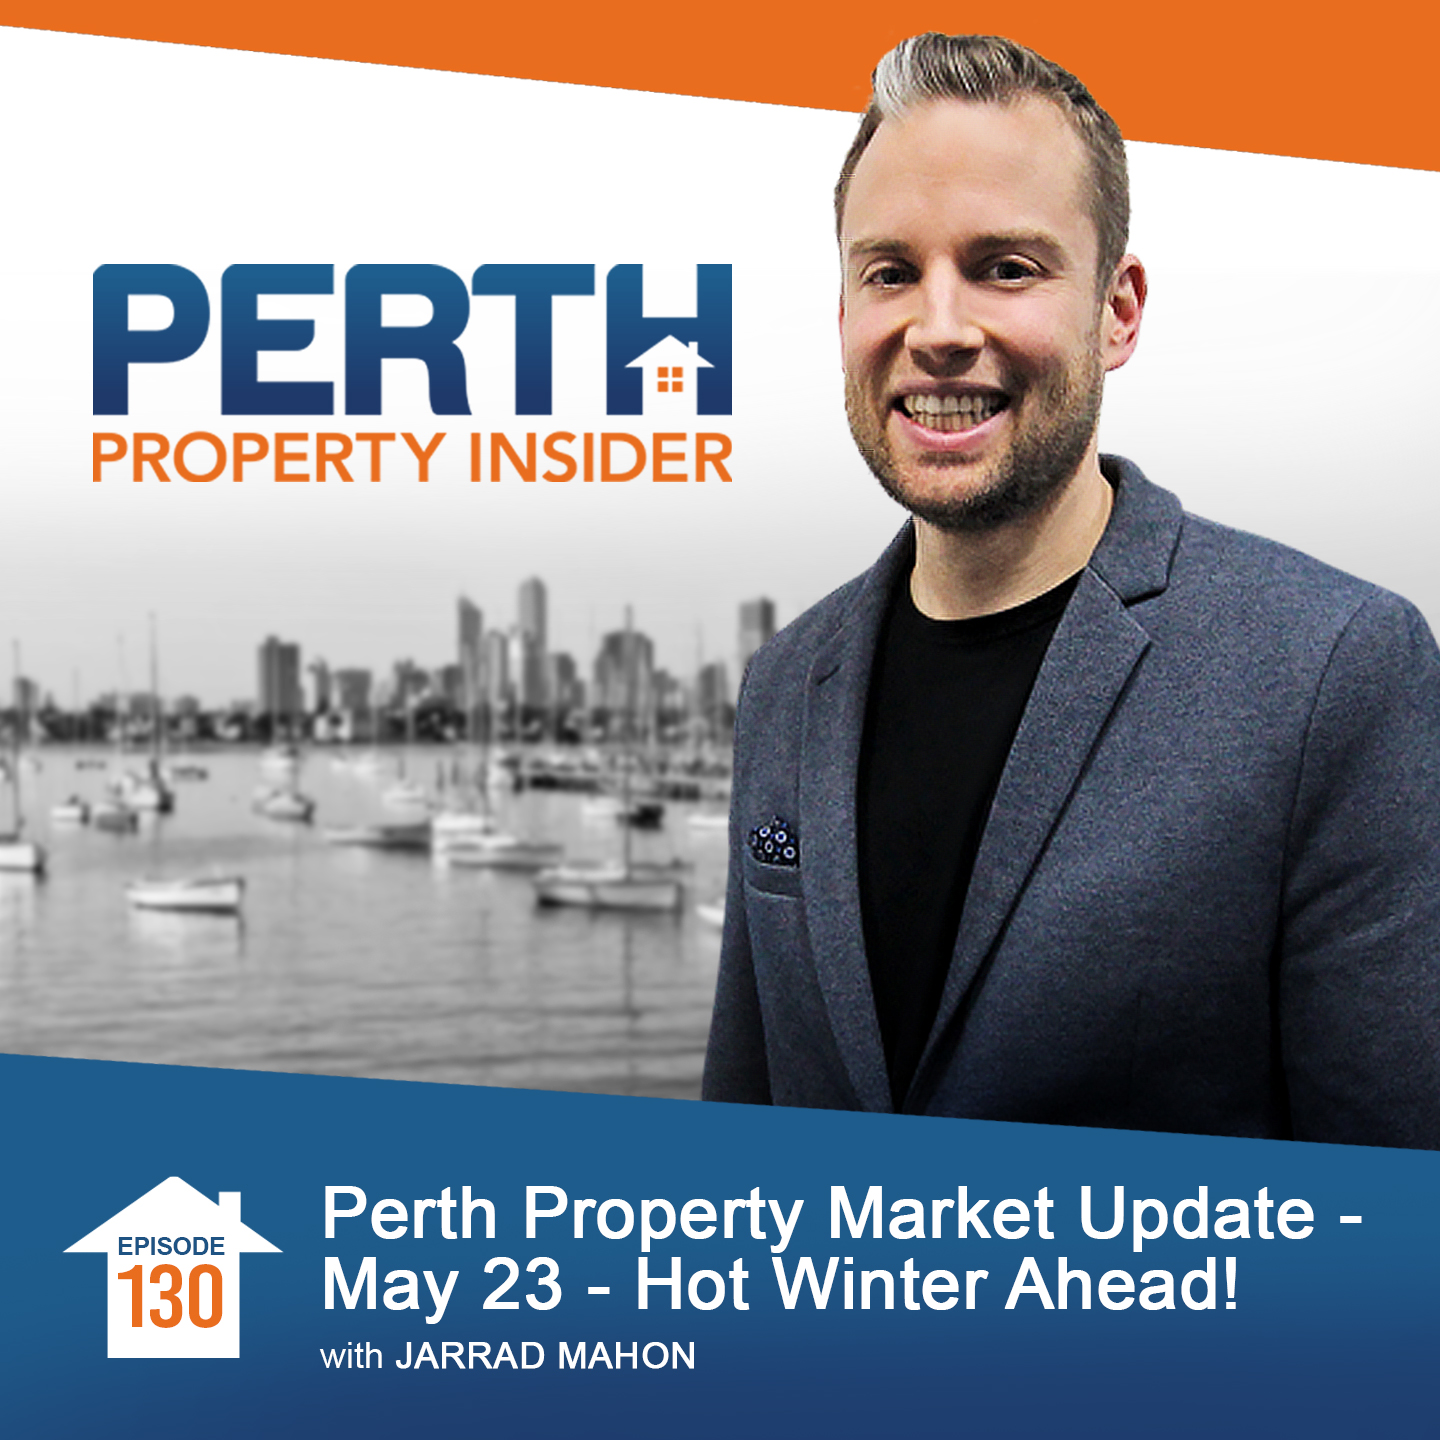 Perth Property Market Update - May 23 - Hot Winter Ahead!